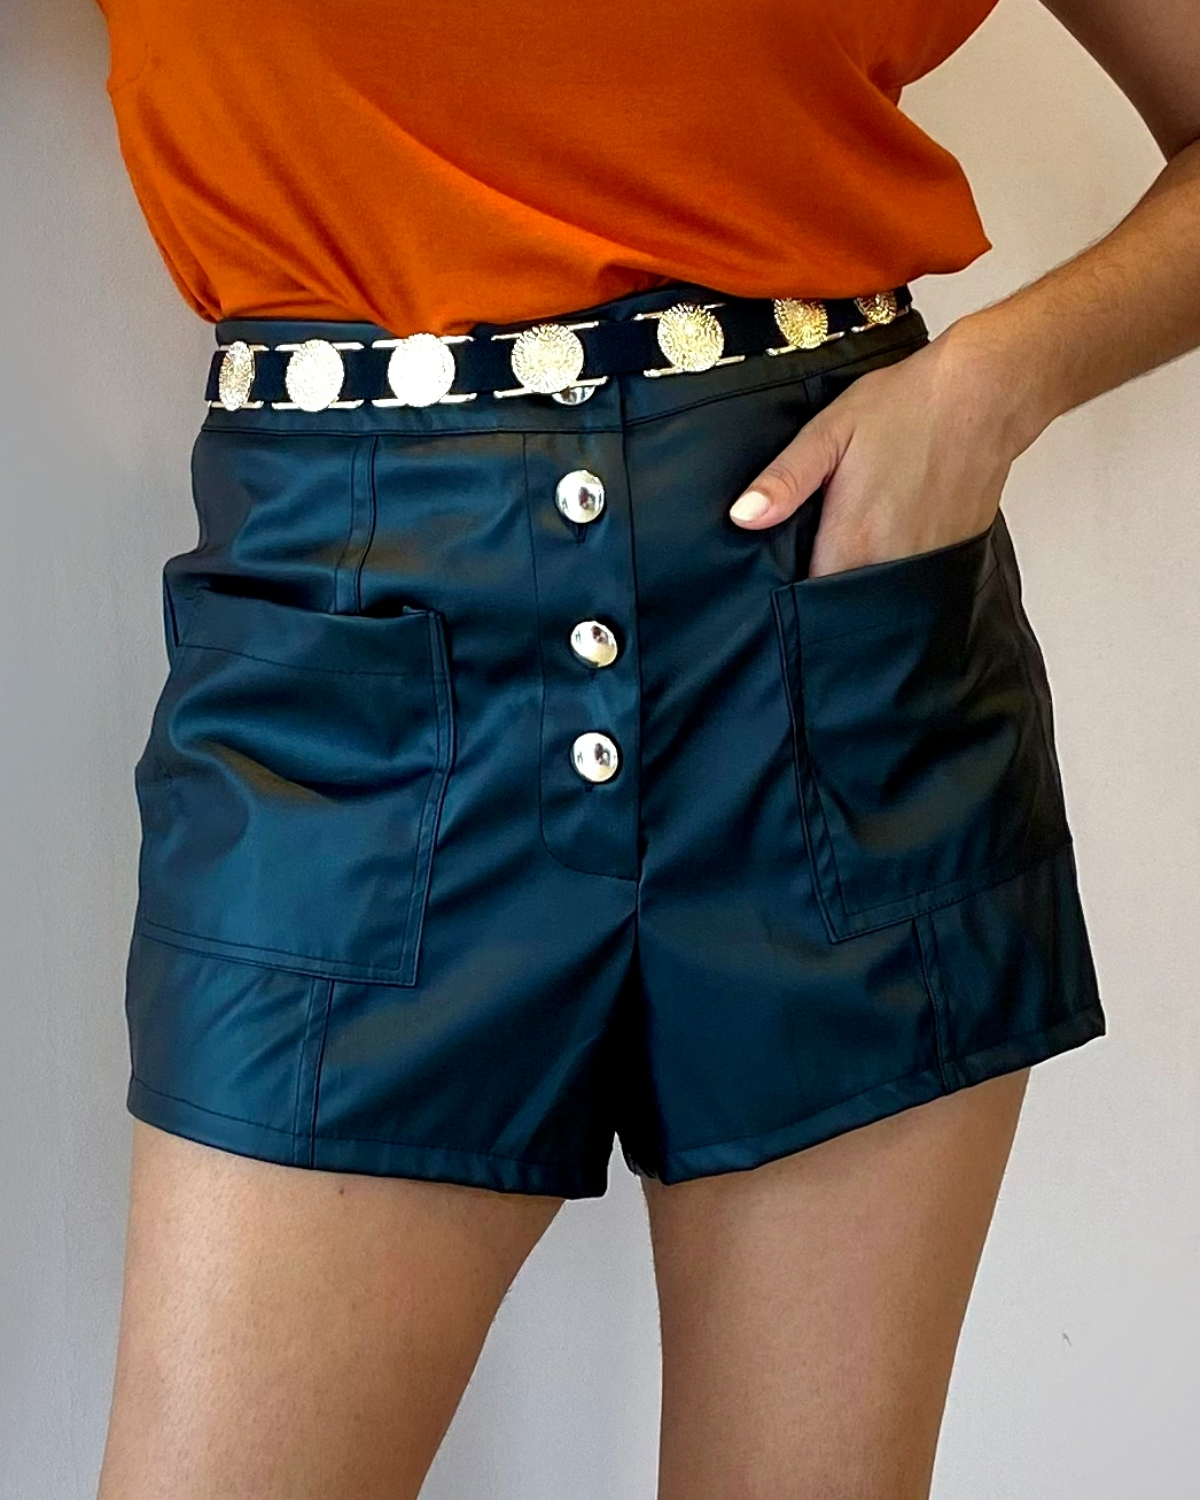 How to use  Shorts